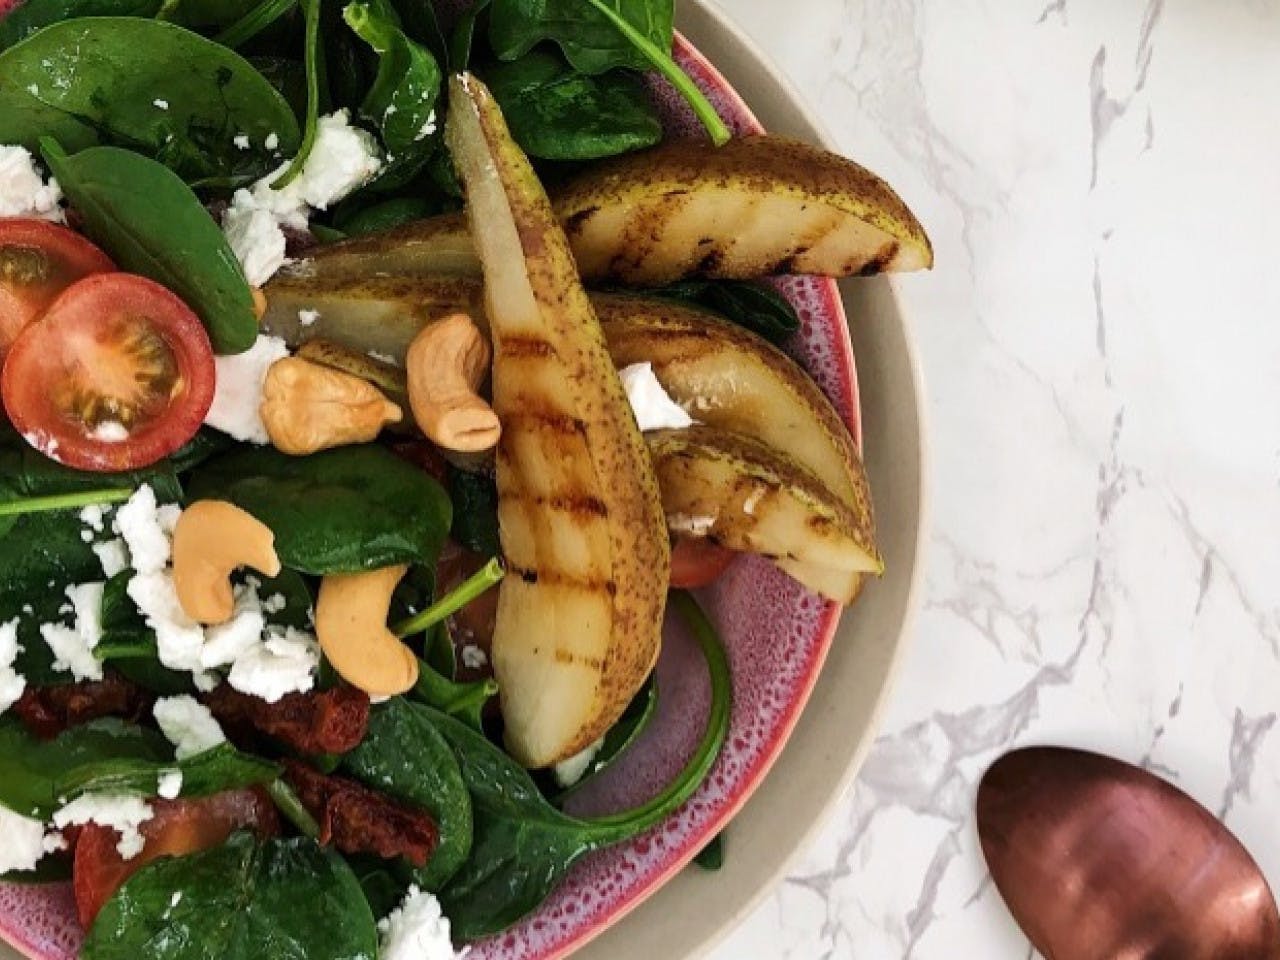 Autumn salad with grilled pear and goat cheese